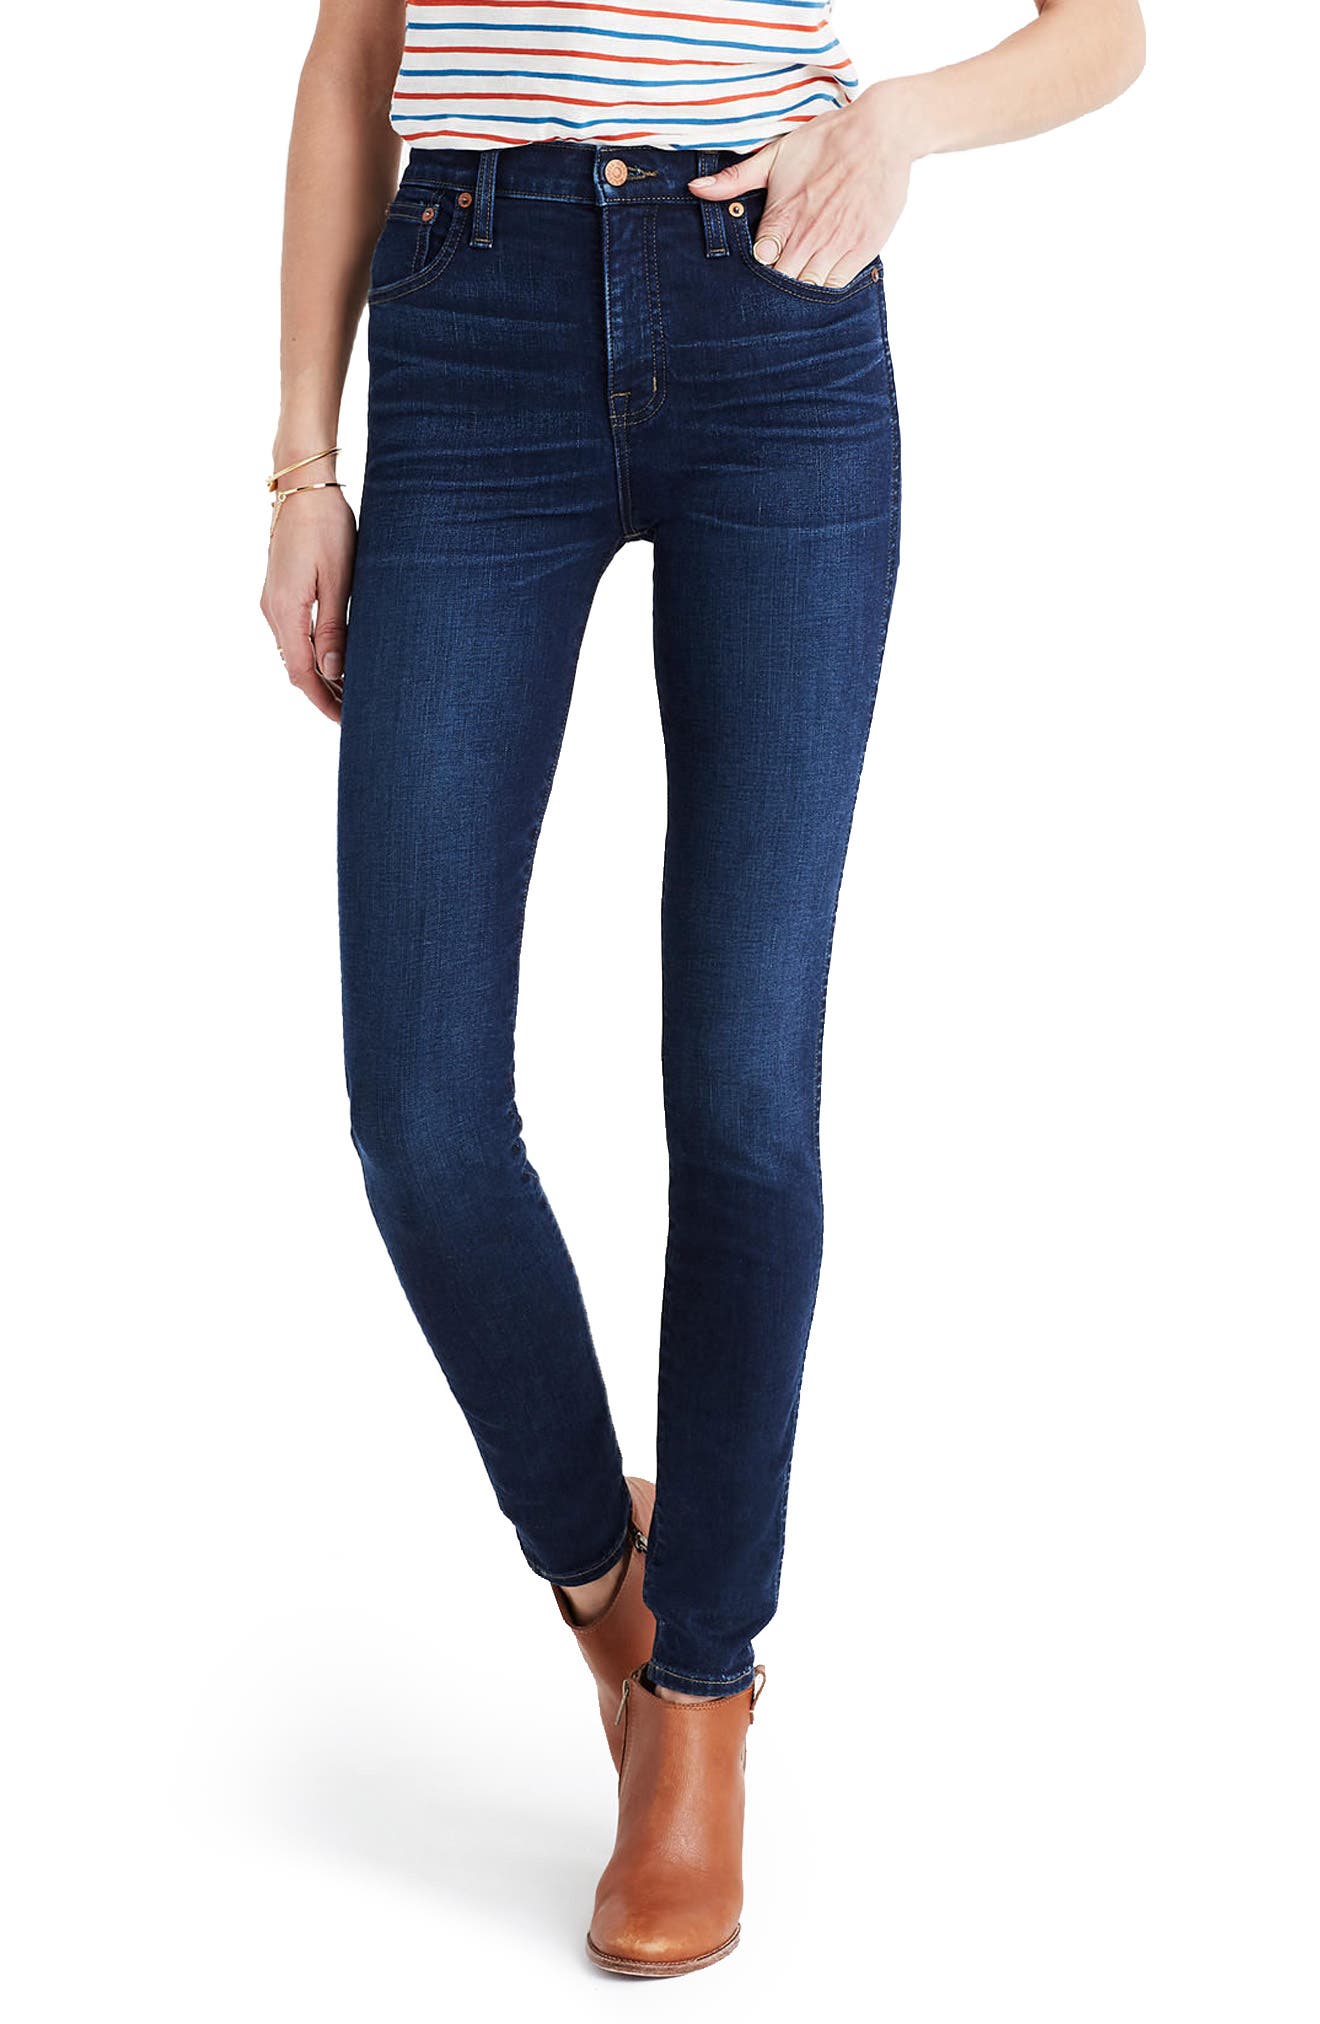 Plus Women's Madewell 10-Inch High Rise Skinny Jeans